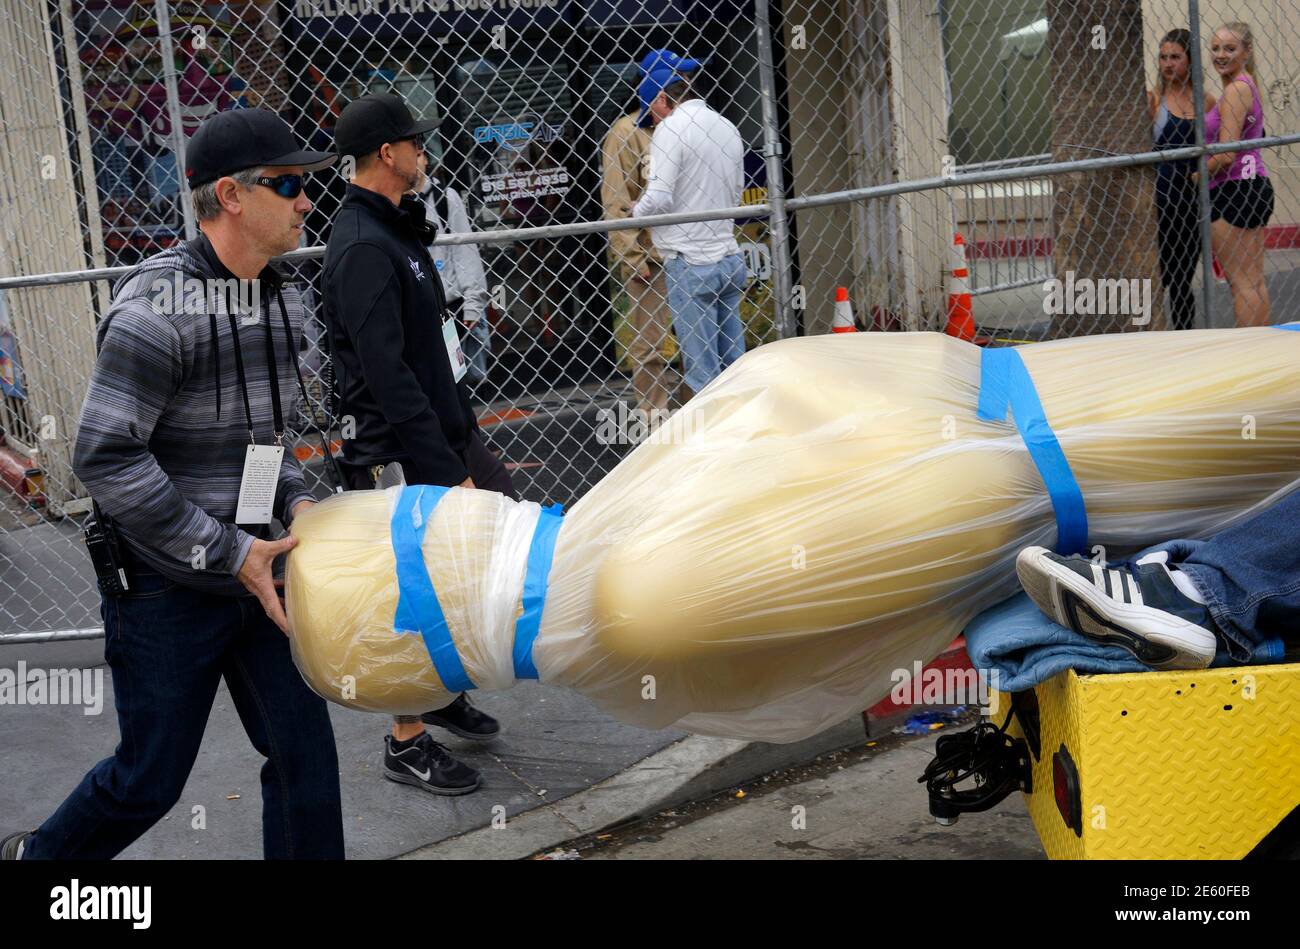 Carpenters move an Oscar statue into place outside the Dolby Theater during preparations for the 87th Academy Awards in Hollywood, California February 20, 2015. The Oscars will be presented at the Dolby Theater February 22, 2015.   REUTERS/Rick Wilking  (UNITED STATES - Tags: ENTERTAINMENT) Stock Photo